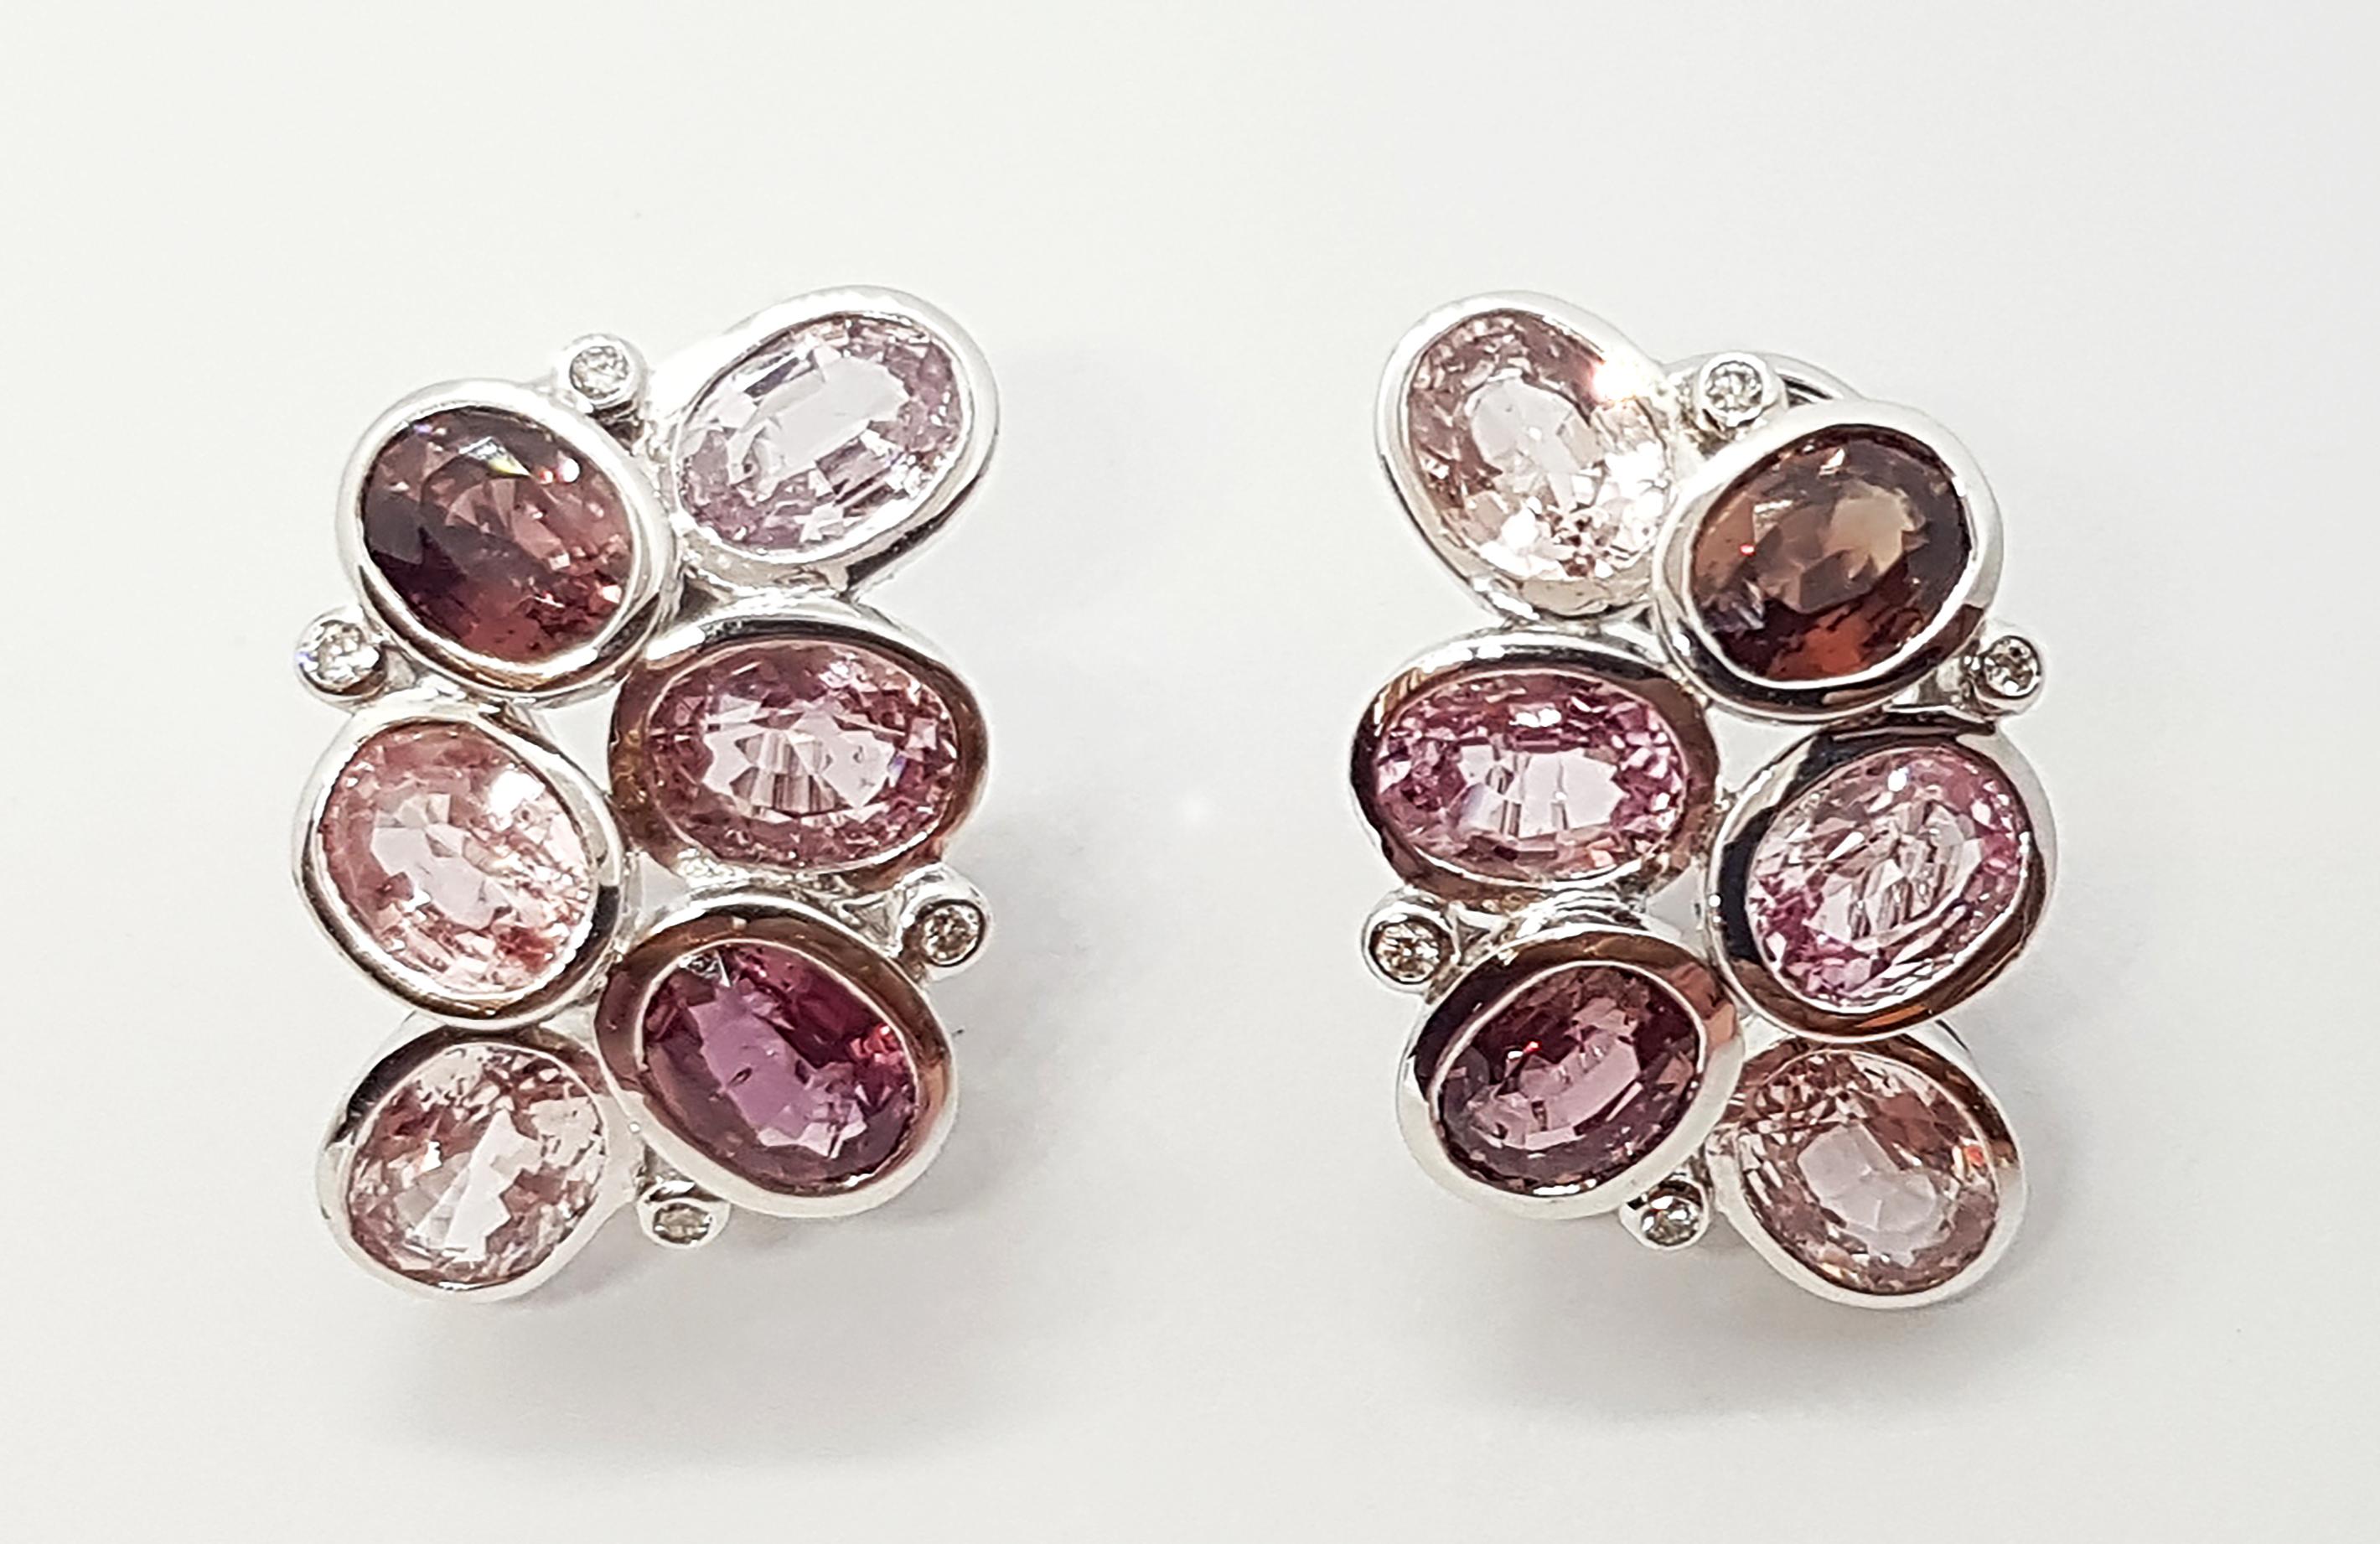 Pink Sapphire 13.48 carats with Diamond 0.12 carat Earrings set in 18 Karat White Gold Settings

Width:  1.5 cm 
Length:  2.4 cm
Total Weight: 12.77 grams

FOUNDED BY AWARD-WINNING COUPLE, NUTTAPON (KENNY) & SHAR-LINN, KAVANT & SHARART IS A FINE